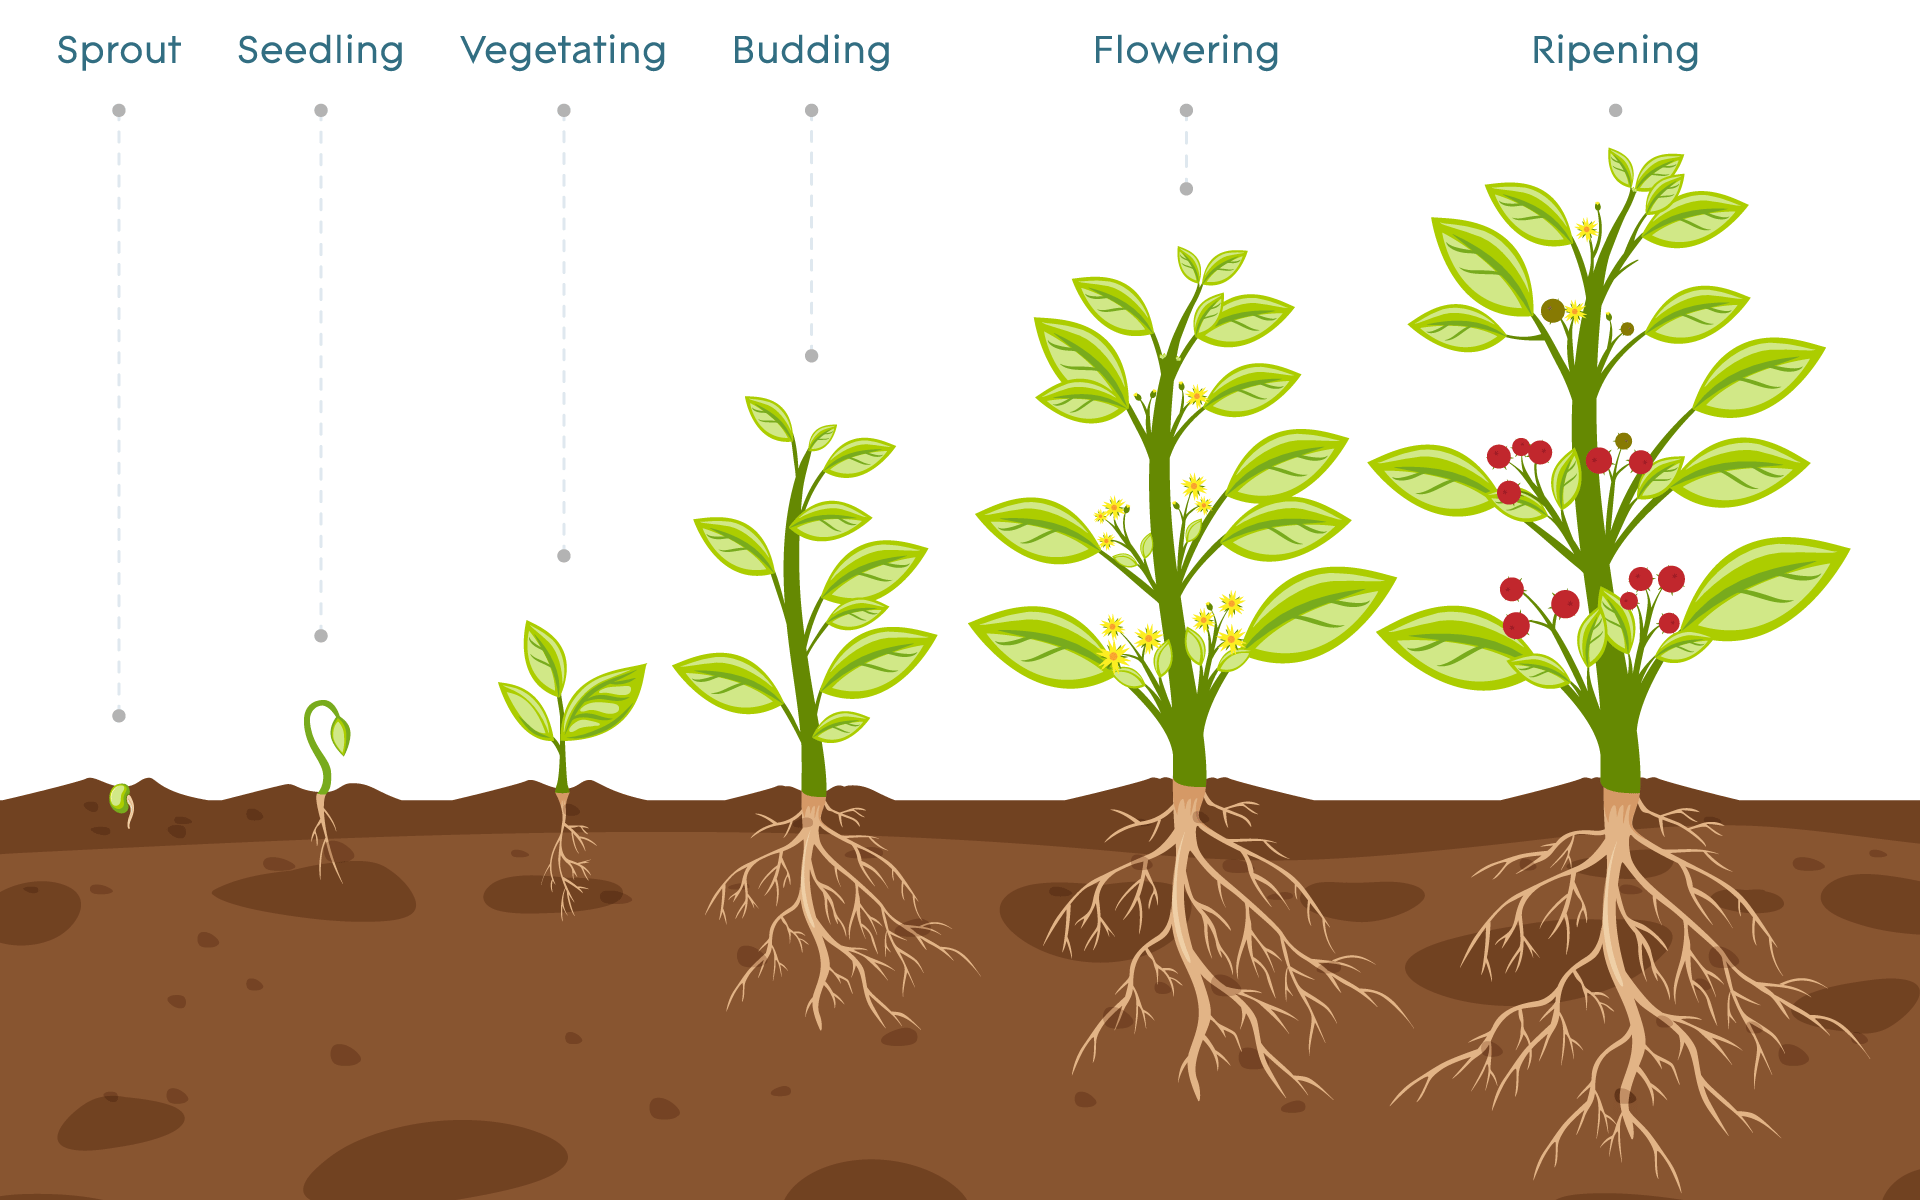 Illustration showing plant cycle from sprout to a ripe plant.